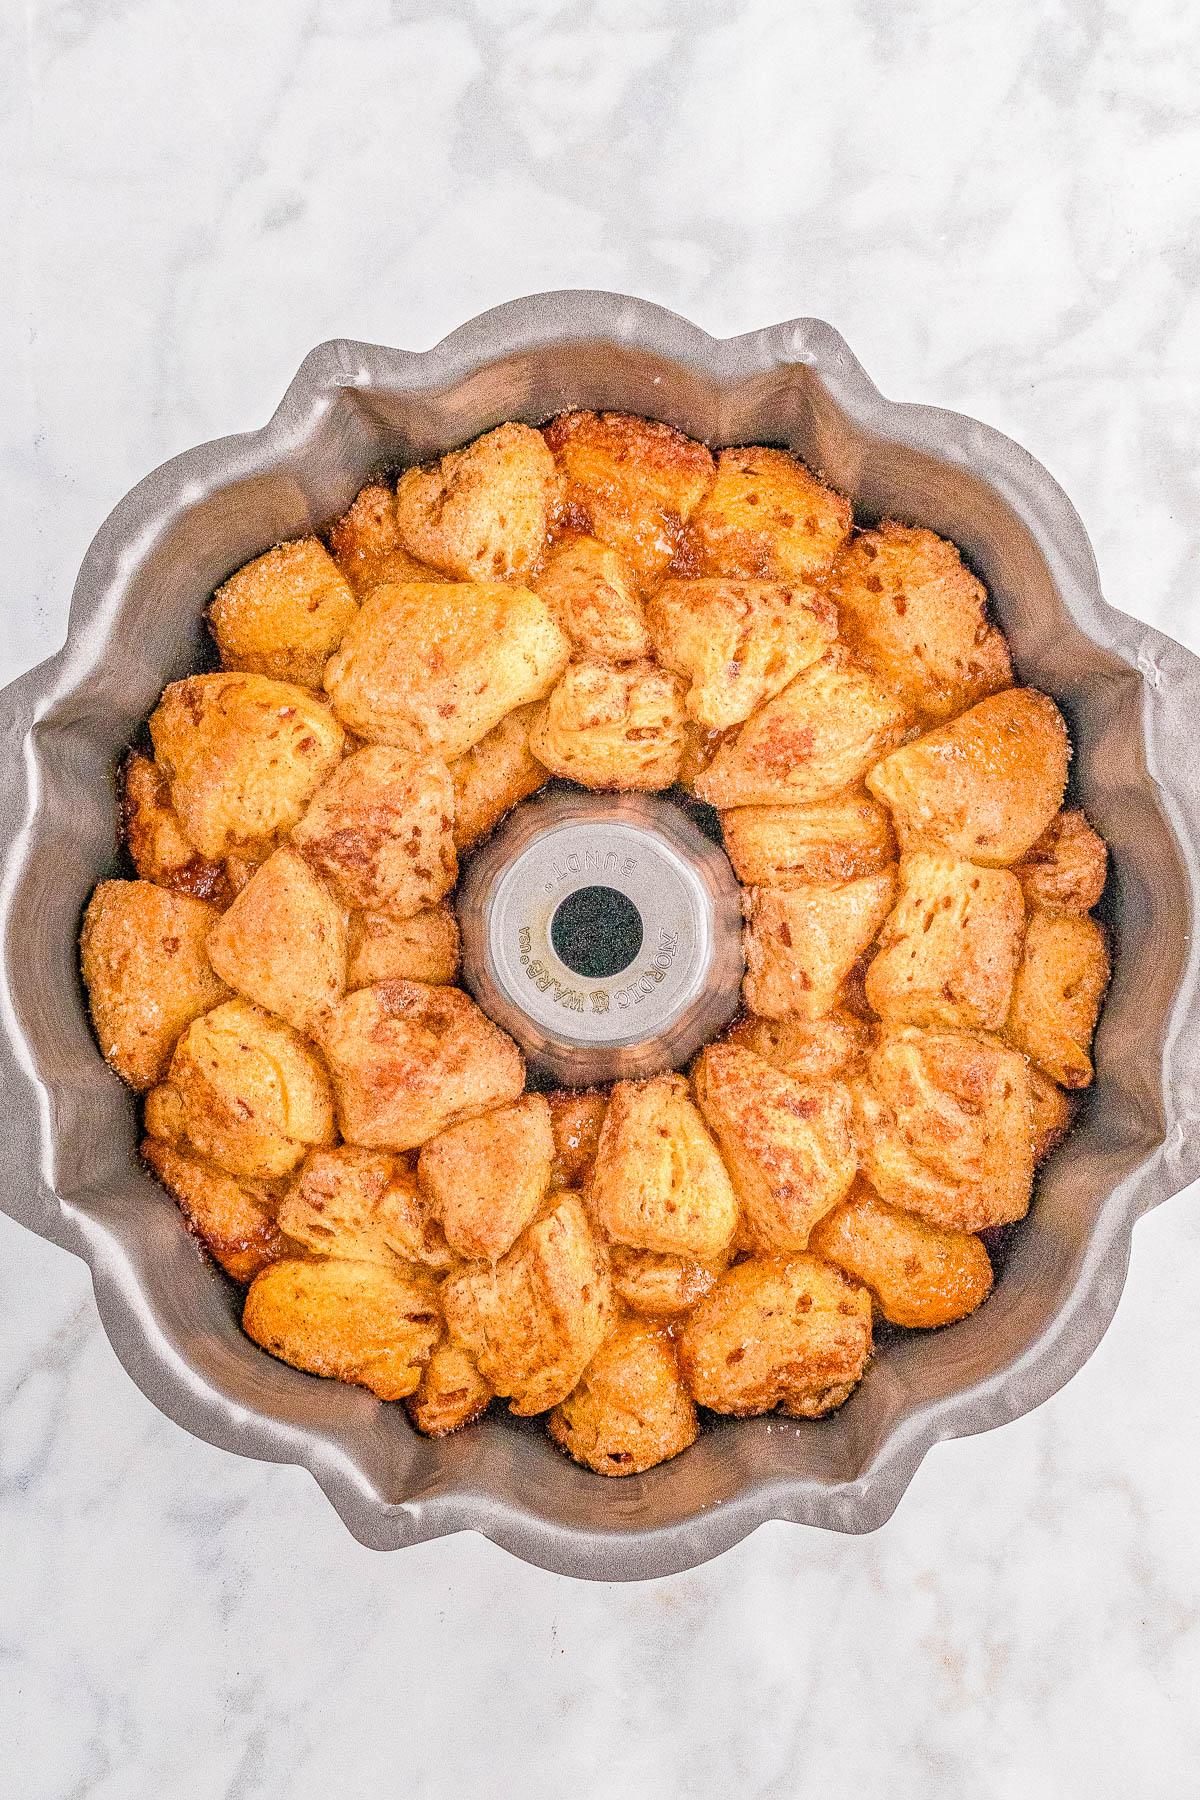 Freshly baked monkey bread in a Bundt pan on a marble surface.